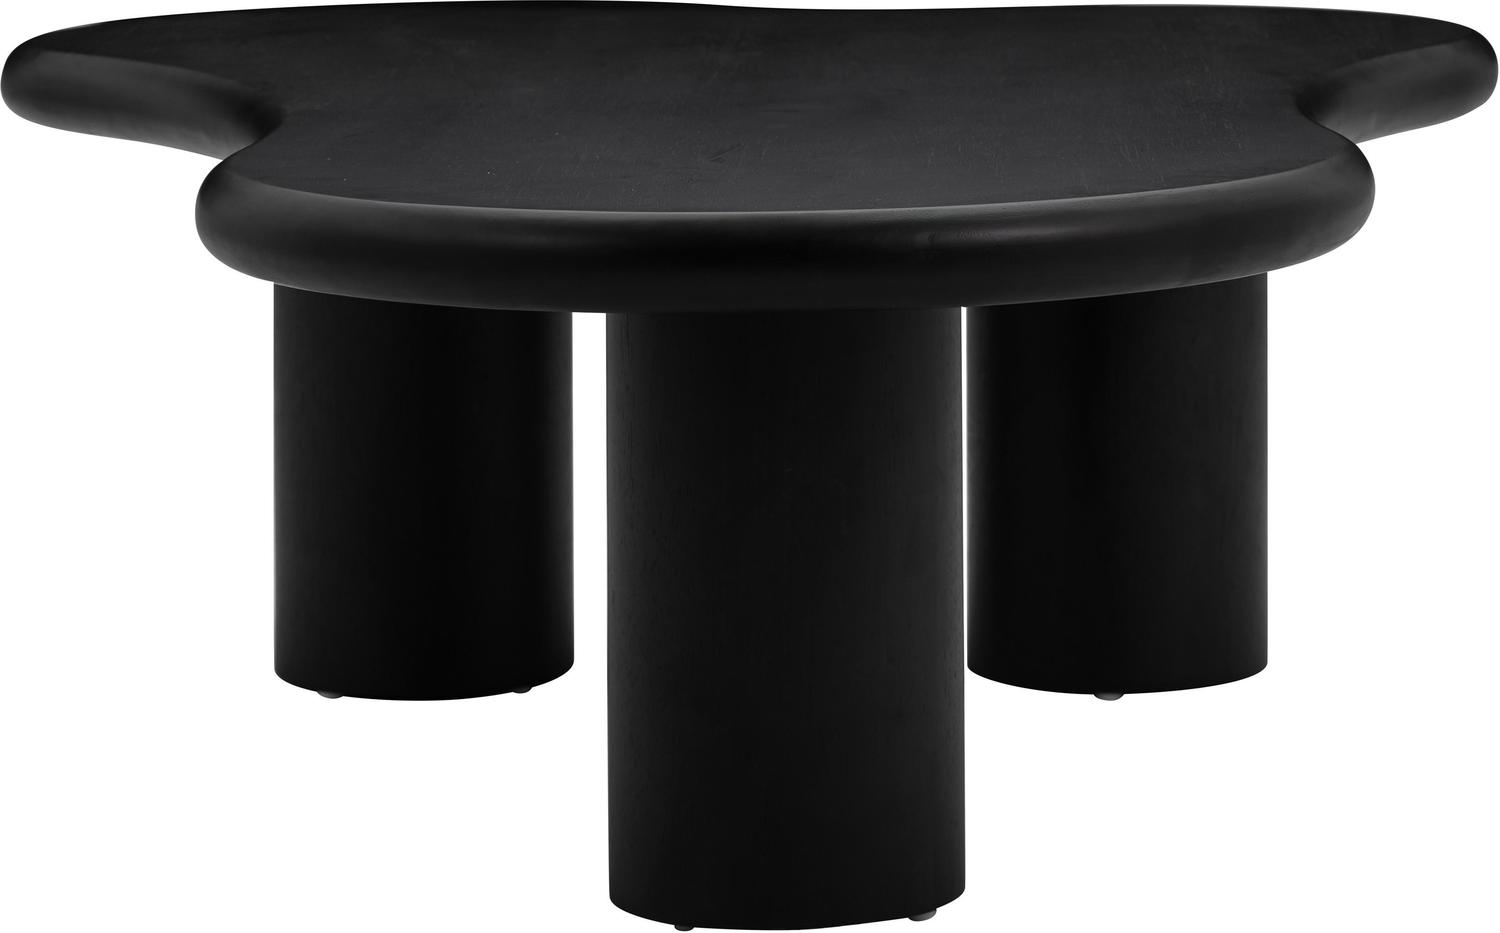 light natural wood coffee table Contemporary Design Furniture Coffee Tables Black